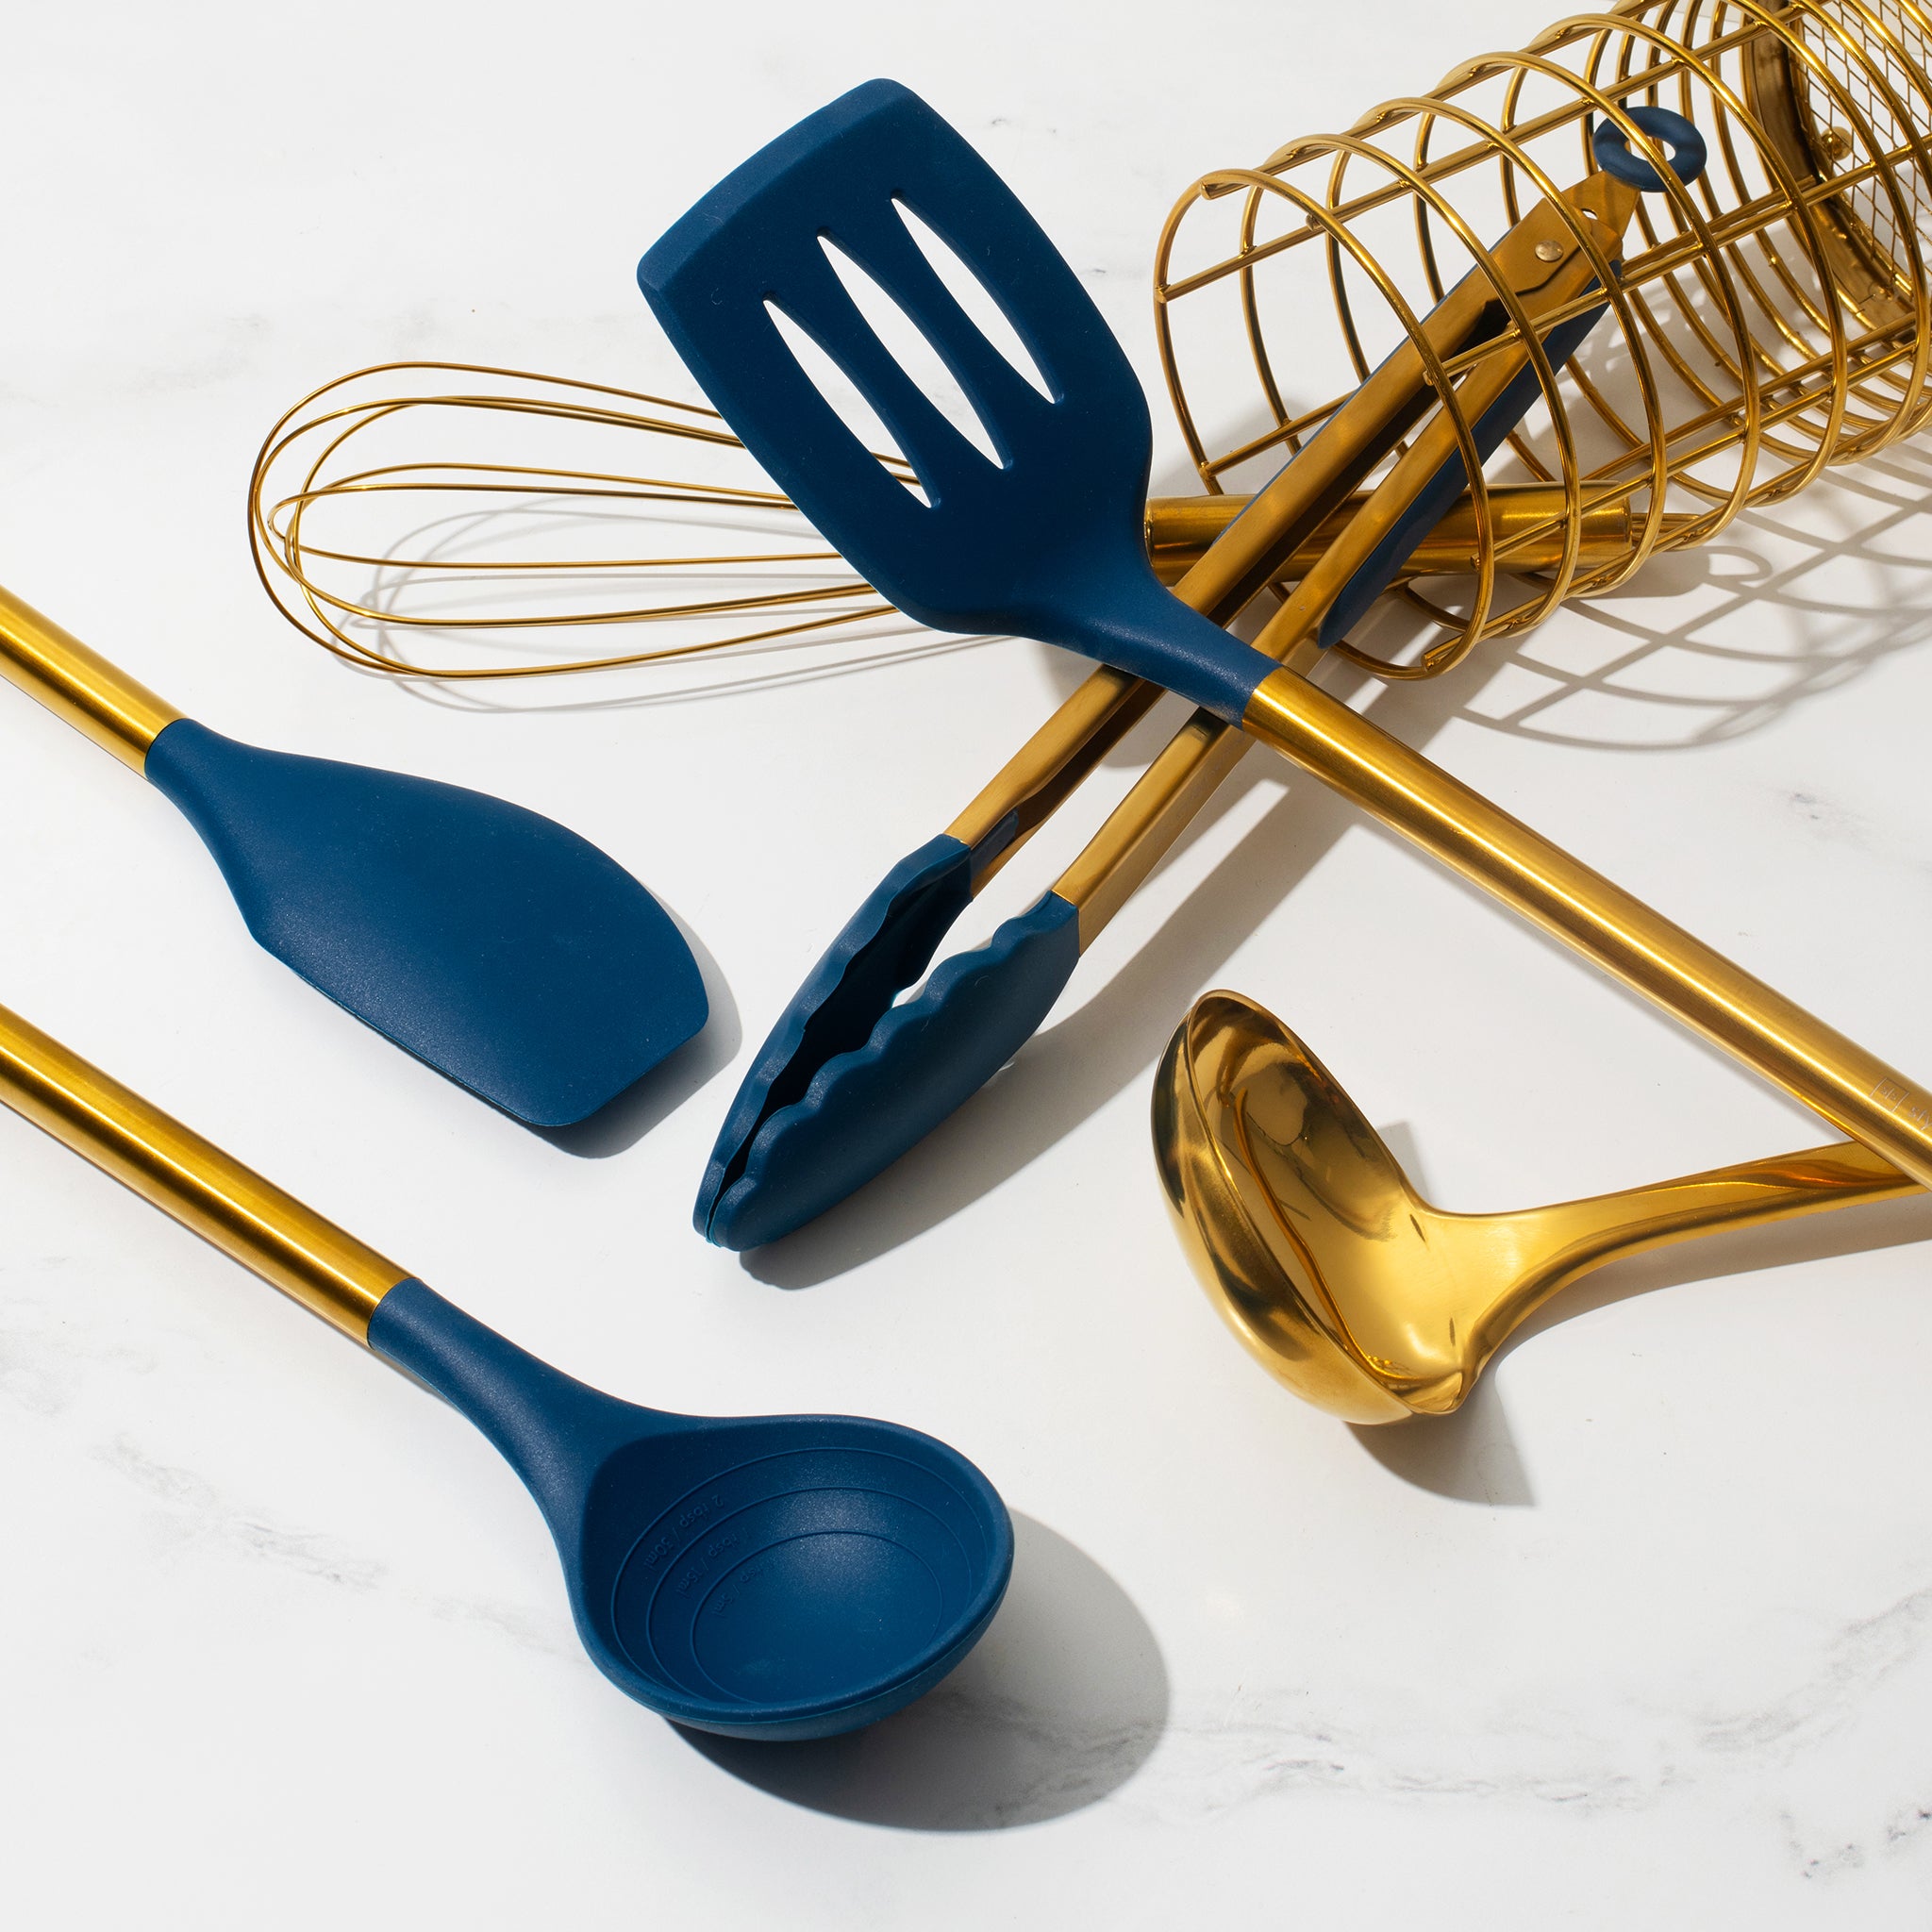 Navy and Gold Kitchen Utensils Set with Holder - Styled Settings